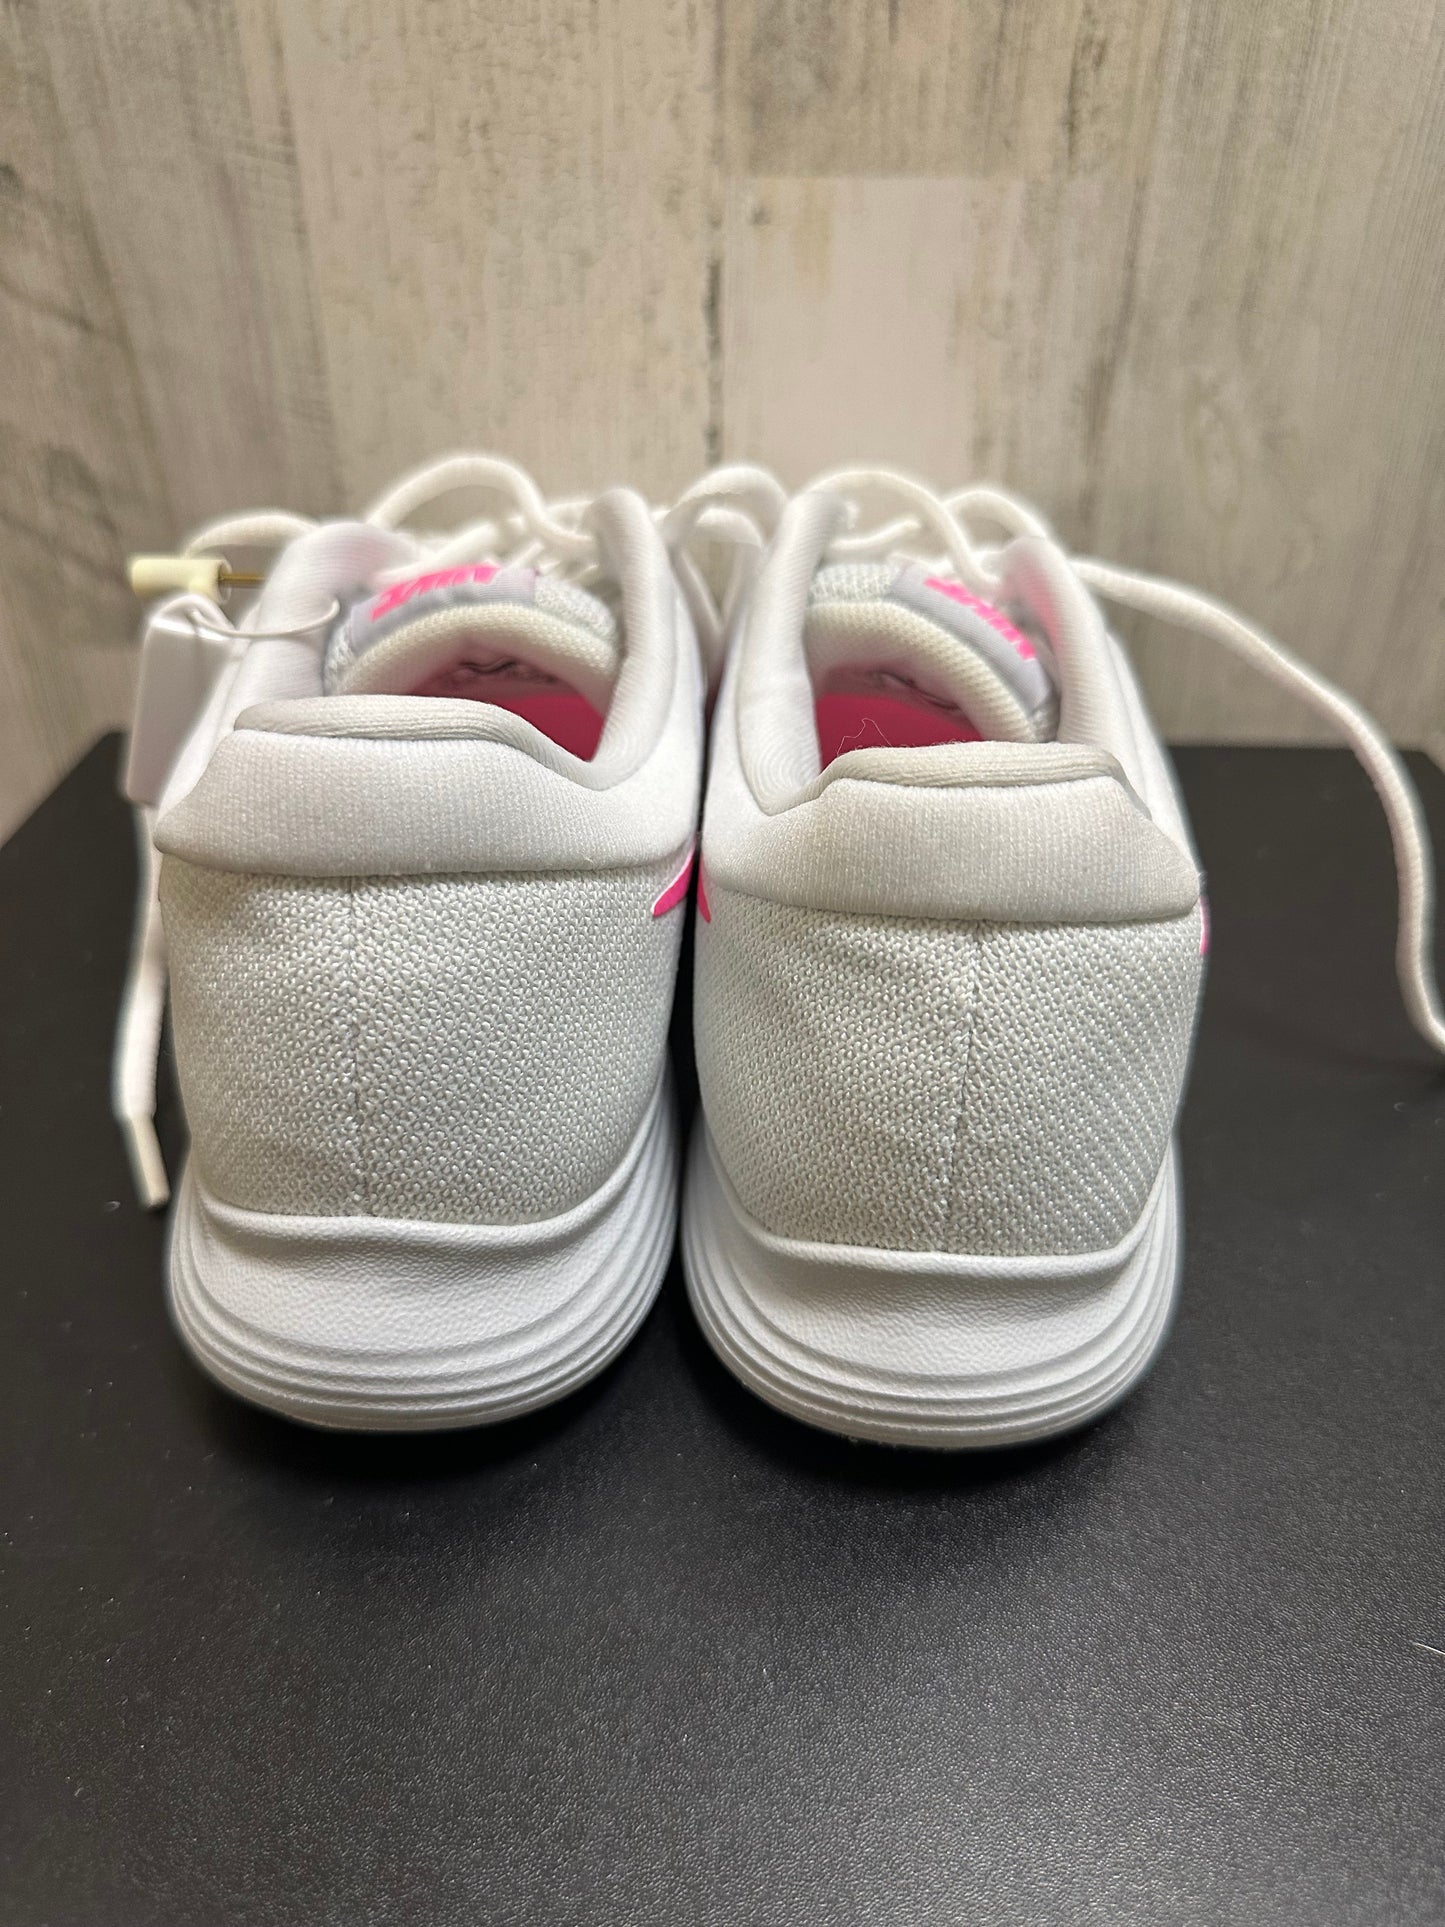 Pink & White Shoes Sneakers Nike, Size 8.5